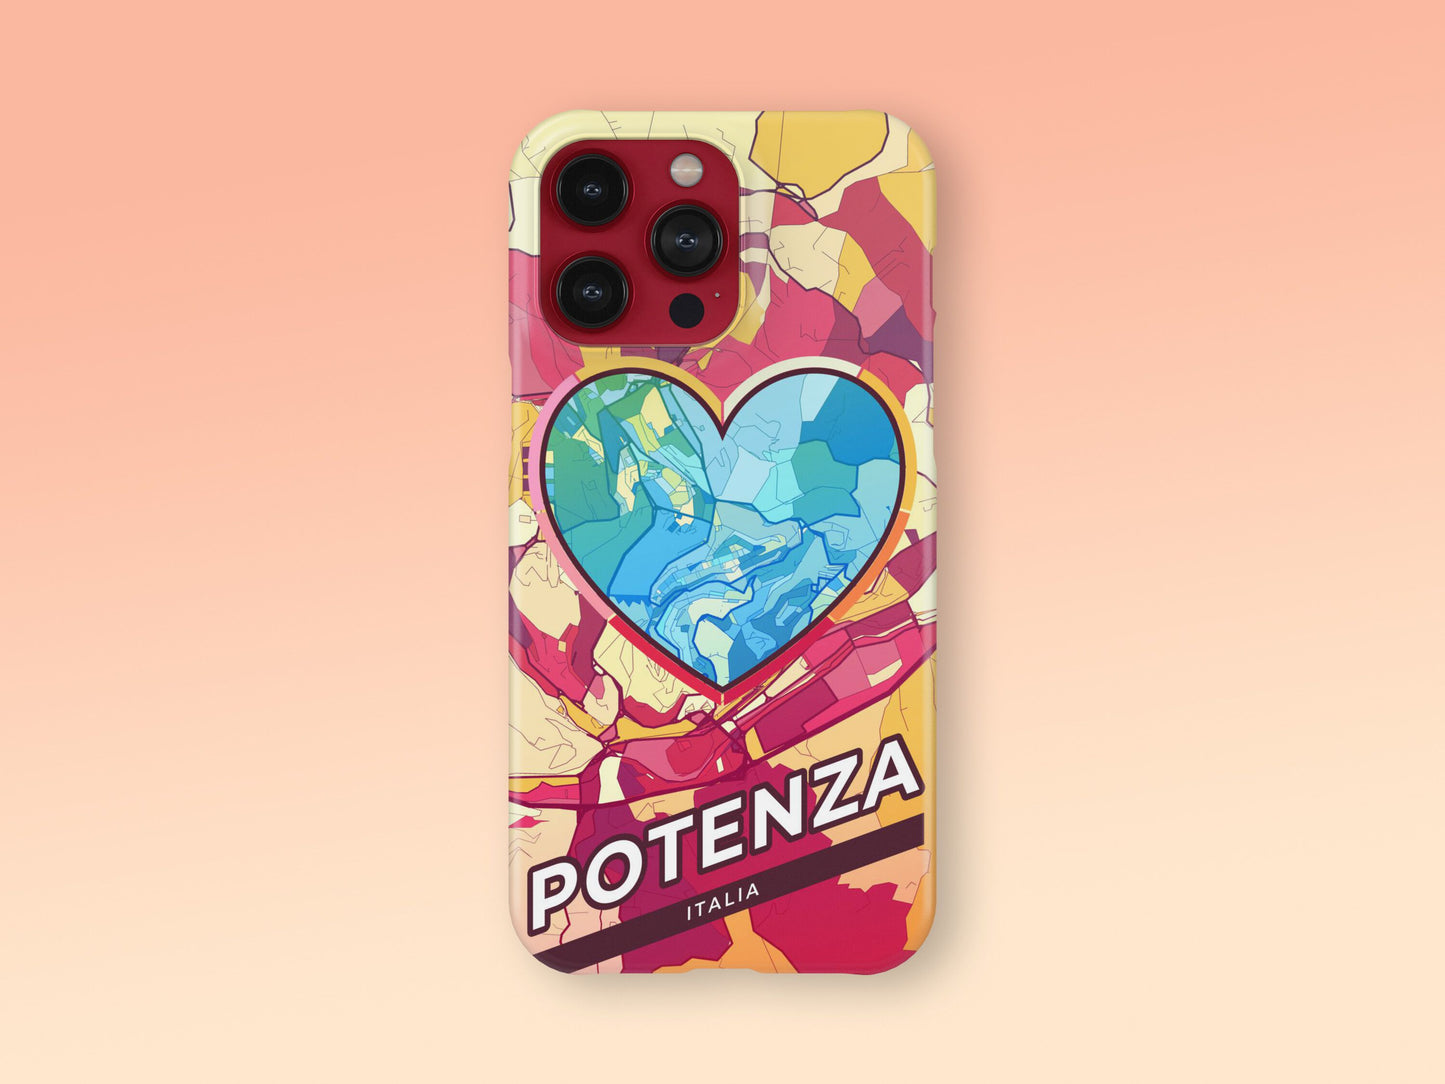 Potenza Italy slim phone case with colorful icon. Birthday, wedding or housewarming gift. Couple match cases. 2